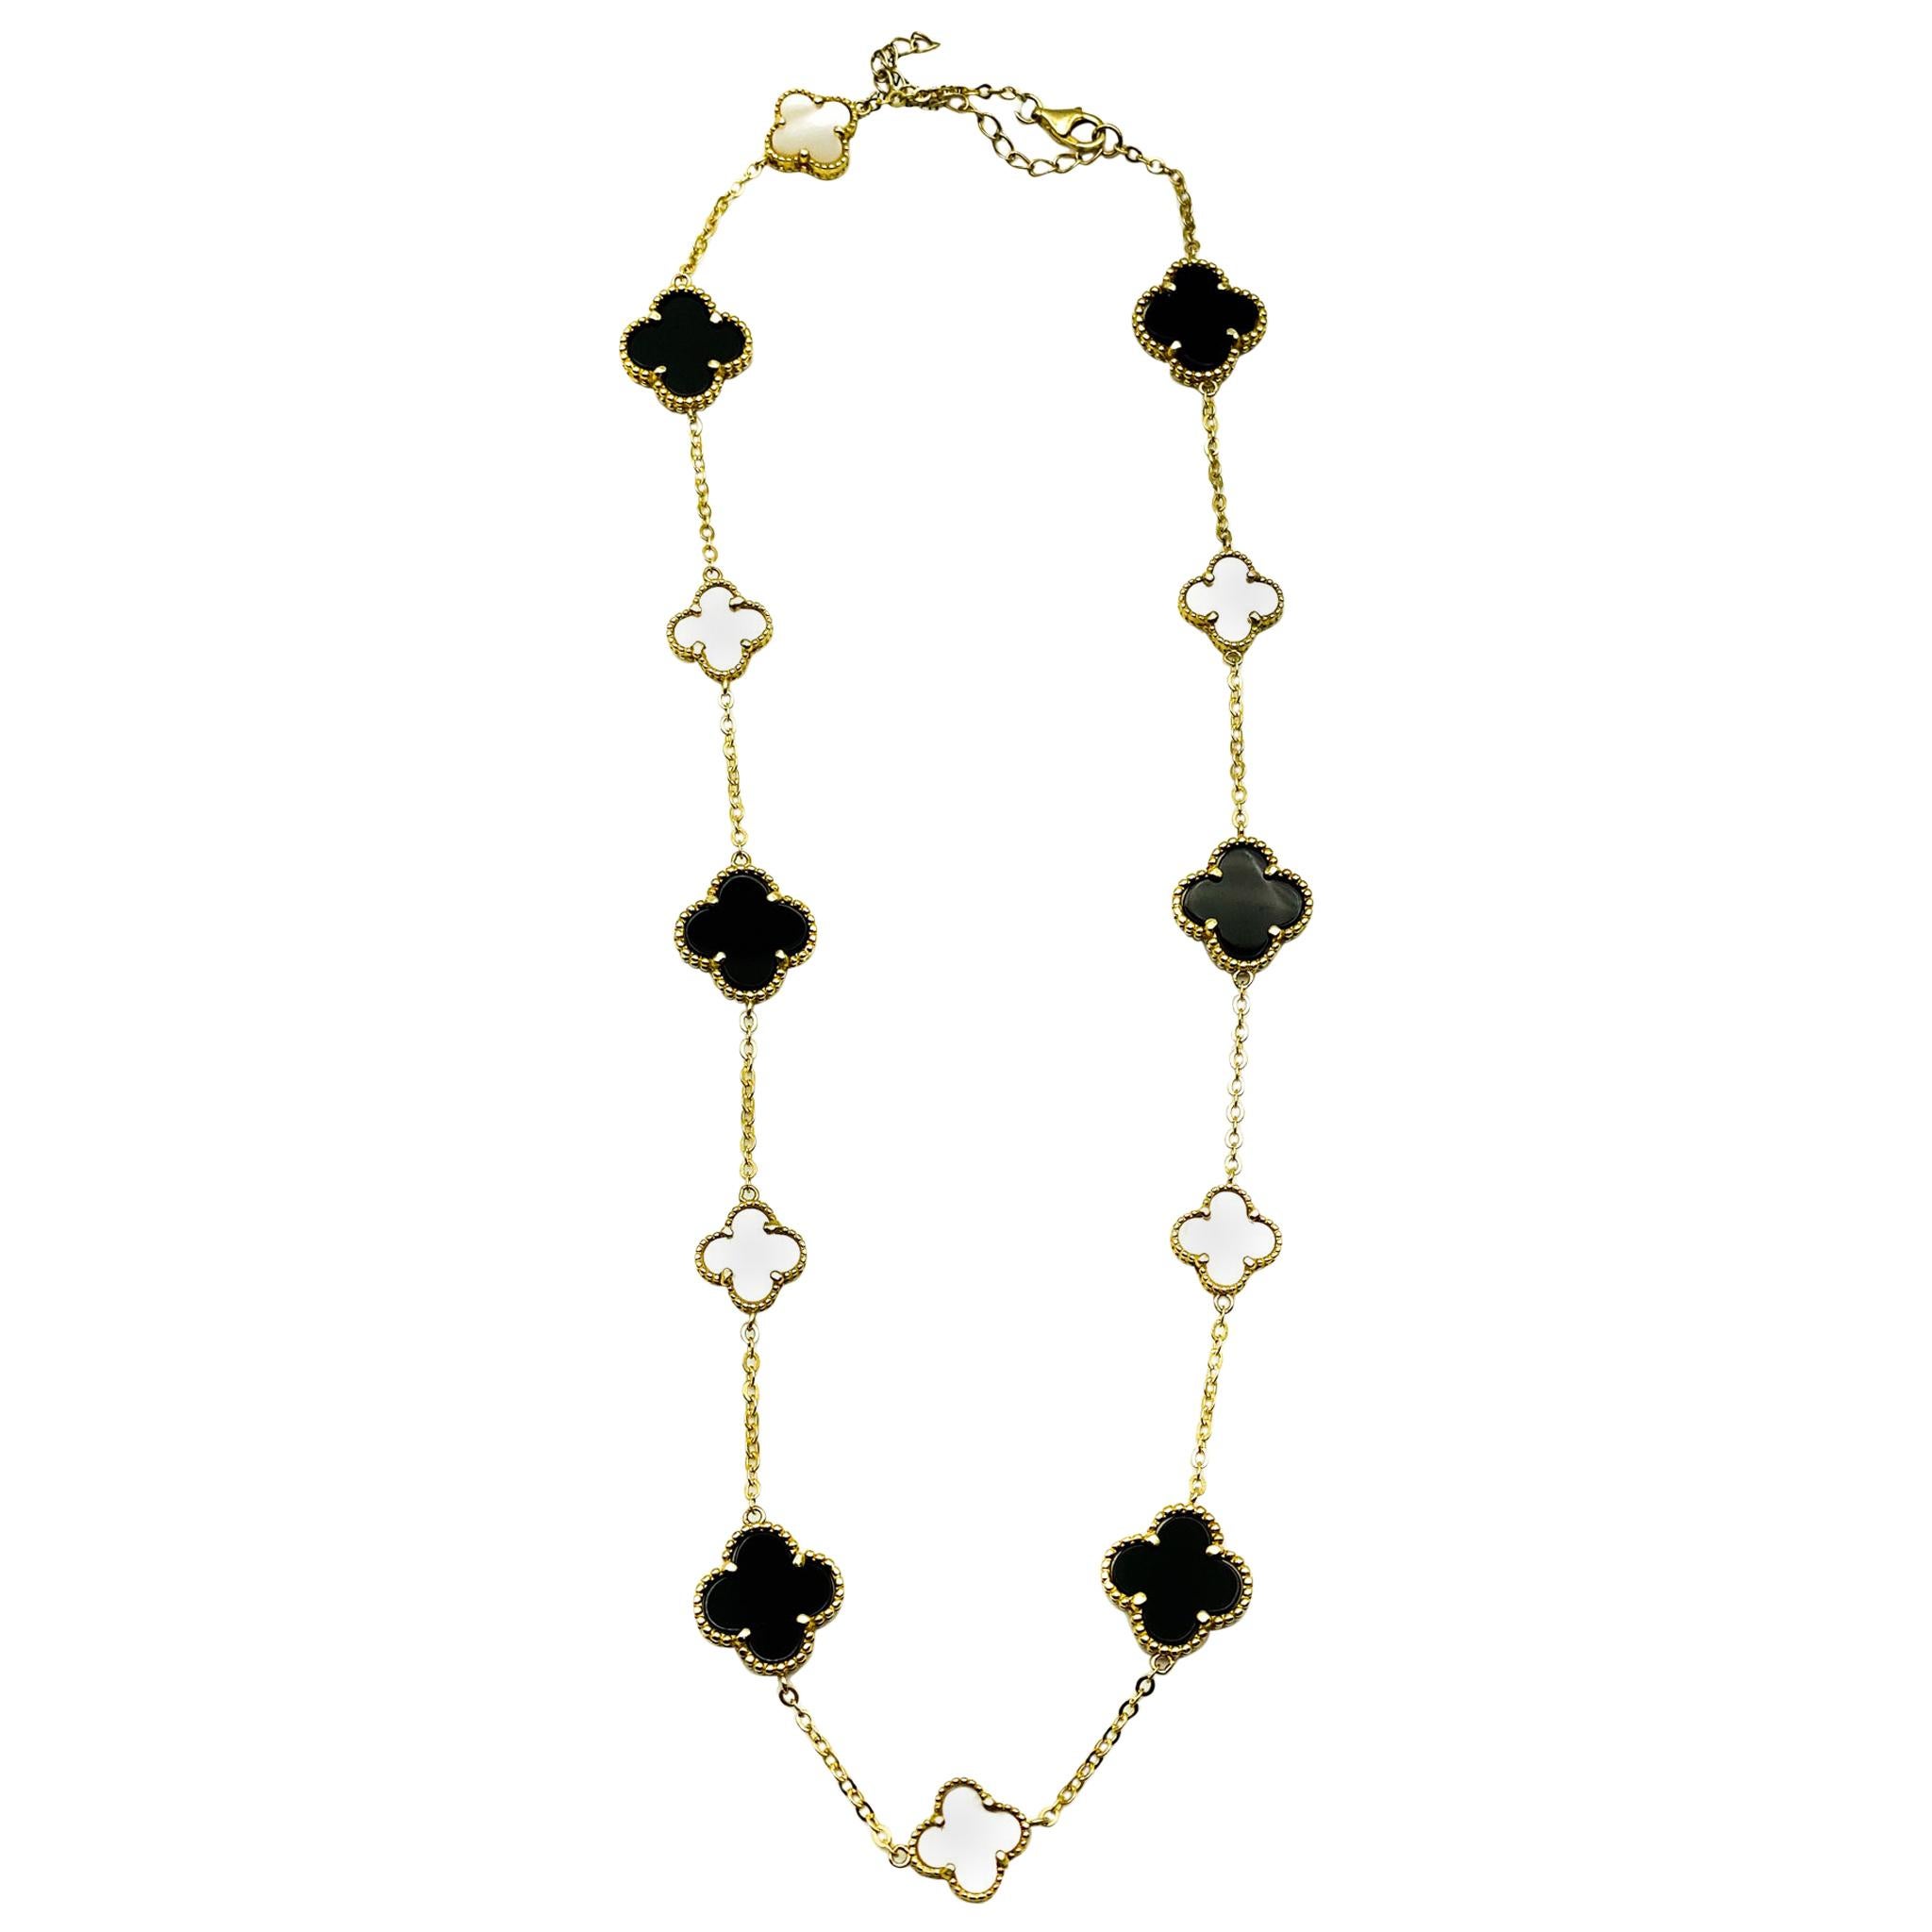 Alhambra Style Black & White Necklace 18K Gold on Sterling Silver